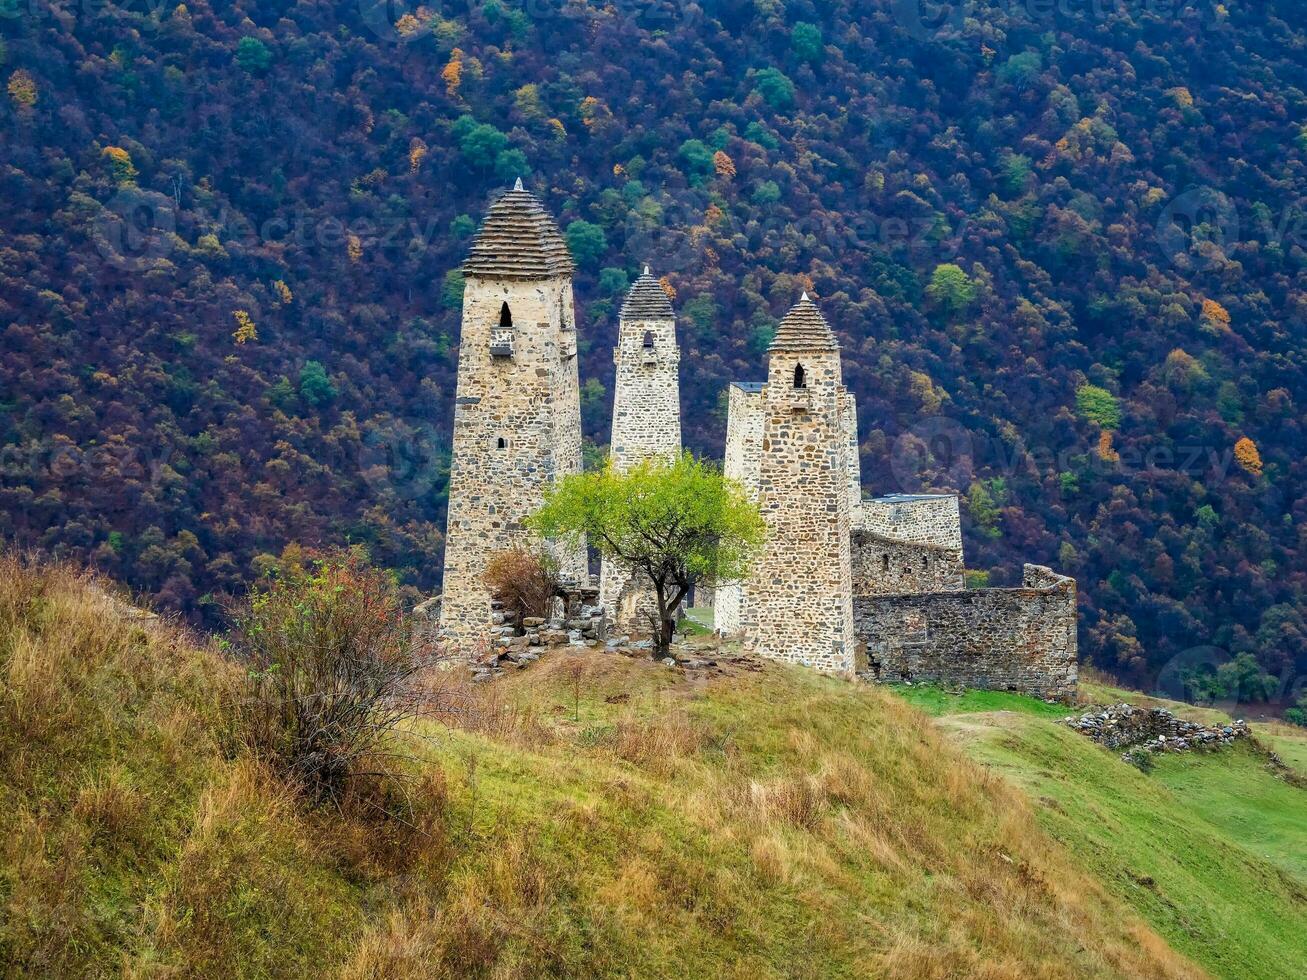 Majestic battle towers of Ingushetia. Beautiful historical monument, tourist attraction. Amazing medieval tower complex Erzi, one of the largest medieval castle-type tower villages. photo